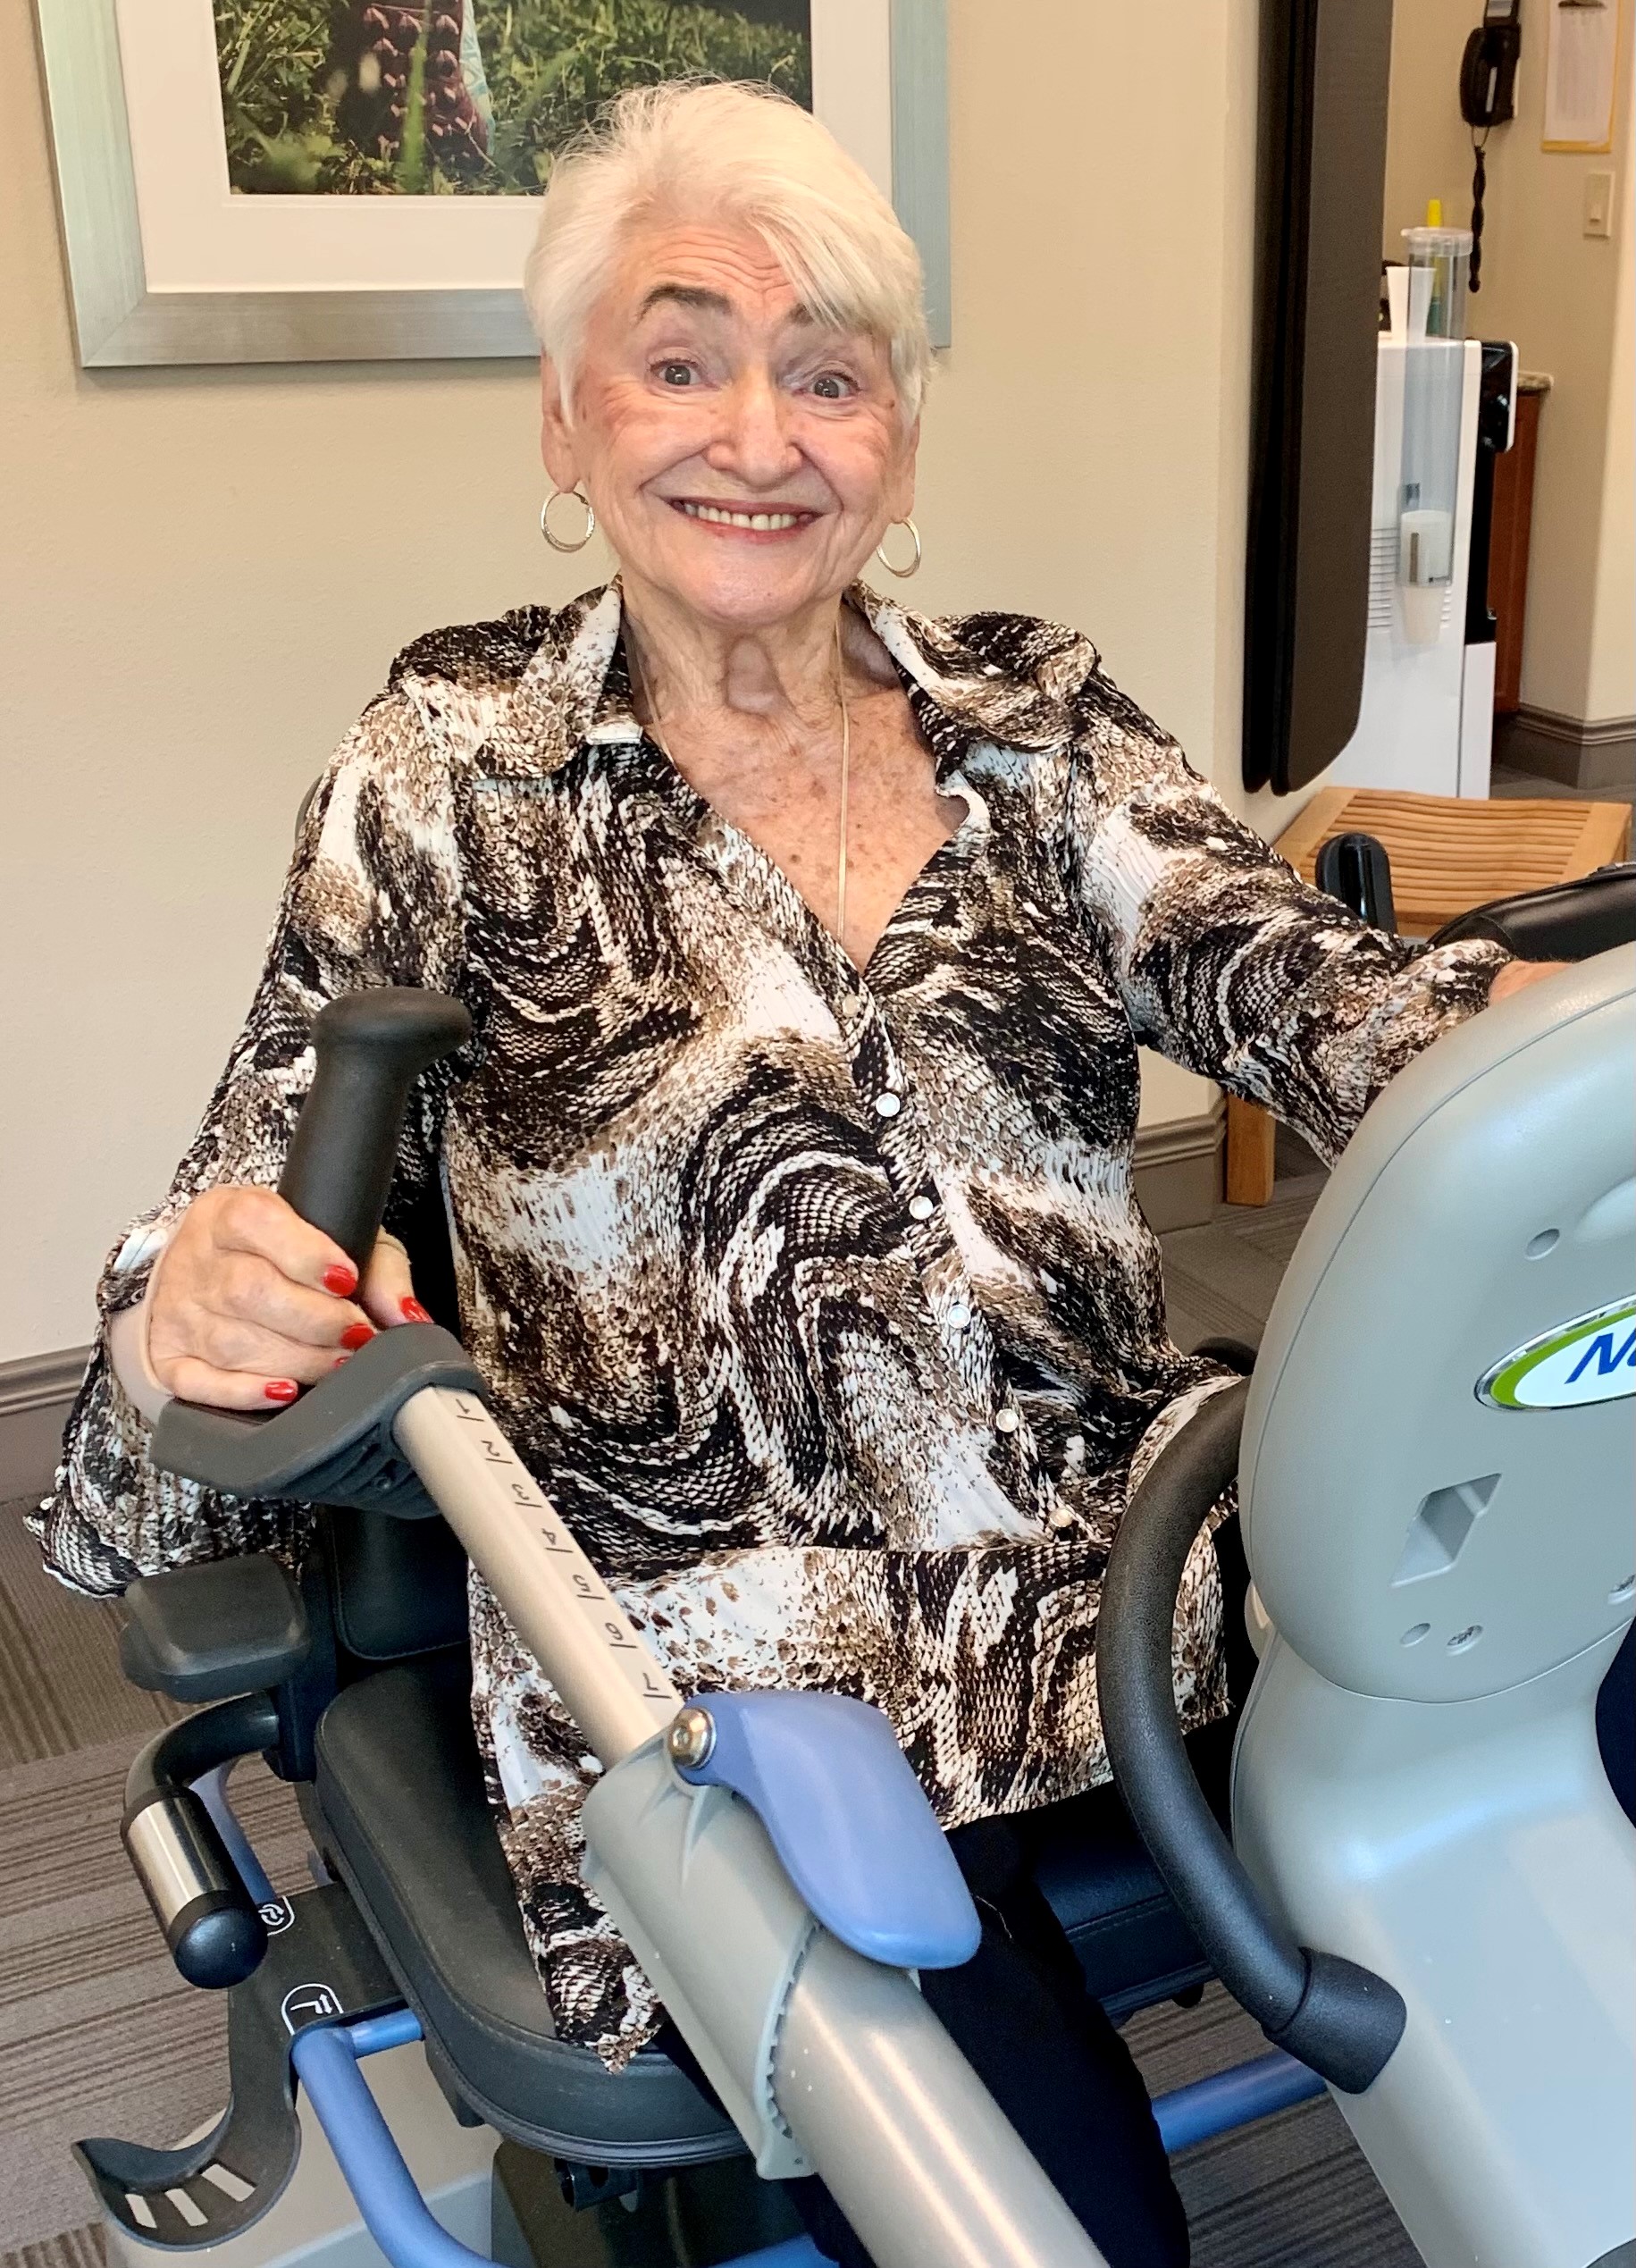 assisted living activities - Joann likes to stay fit